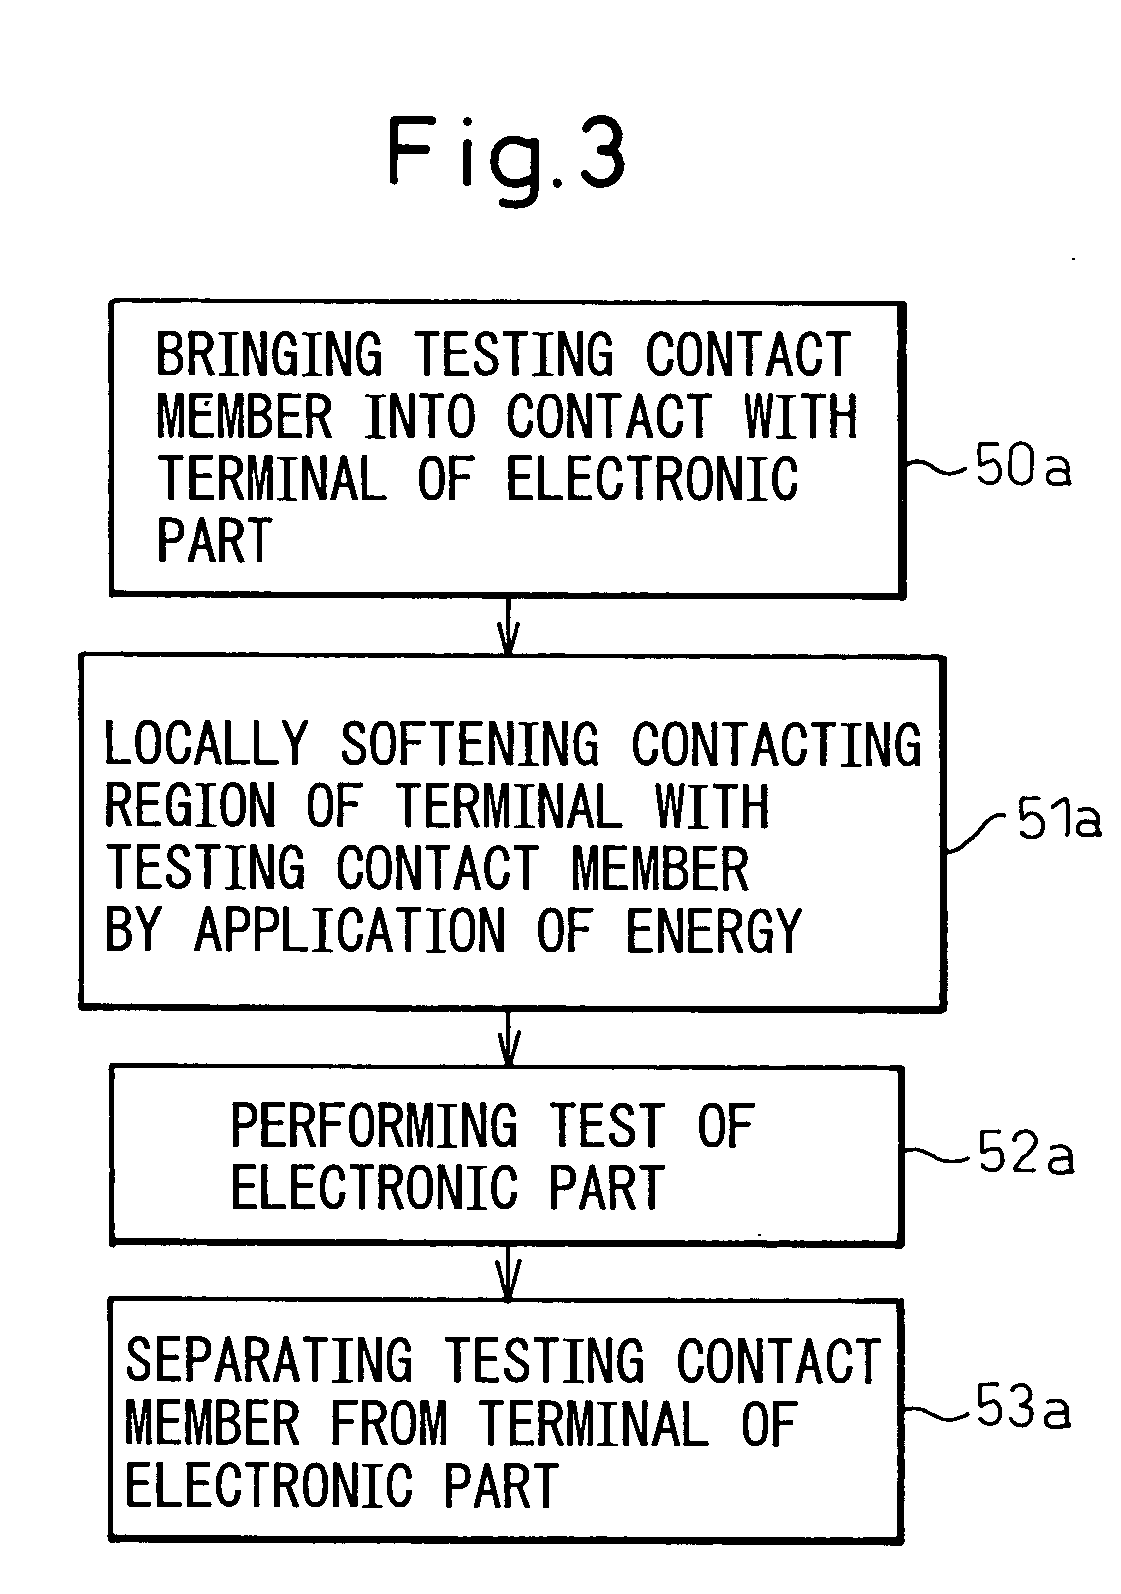 Electrical connecting method